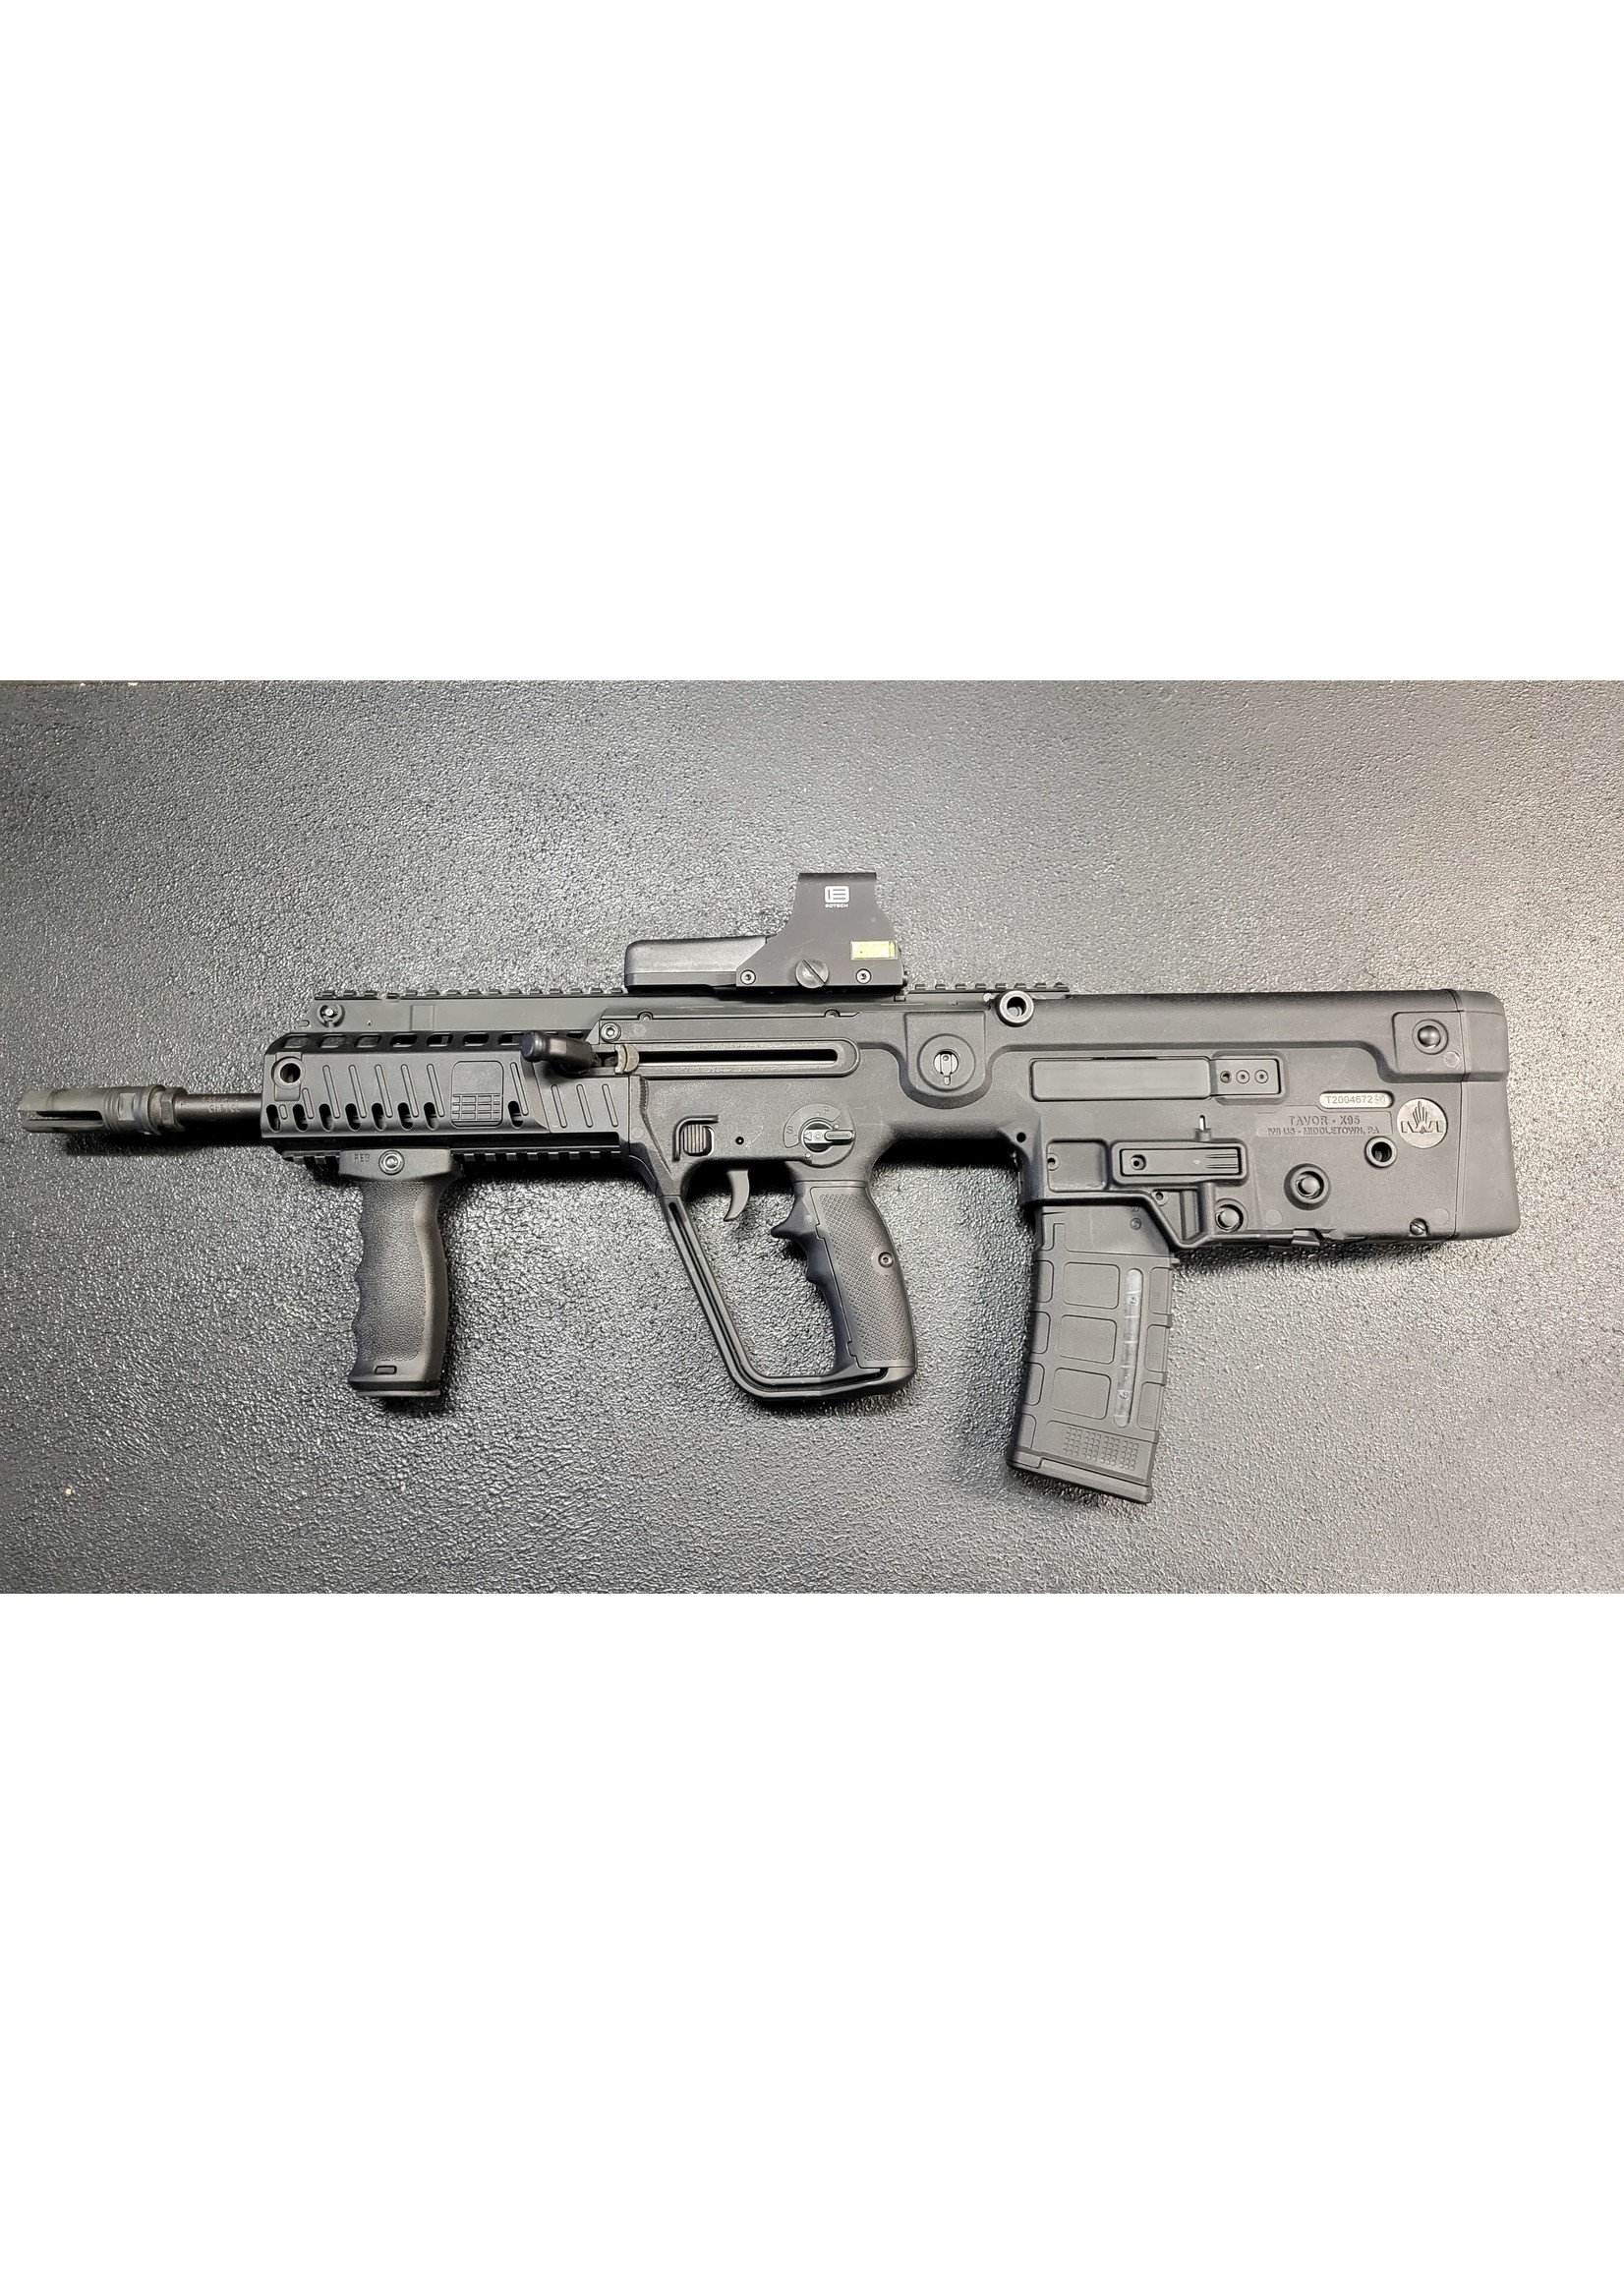 IWI (USED) IWI Tavor X95 5.56 16" Black bullpup w/ flash hider vertical foregrip and Eotech 512